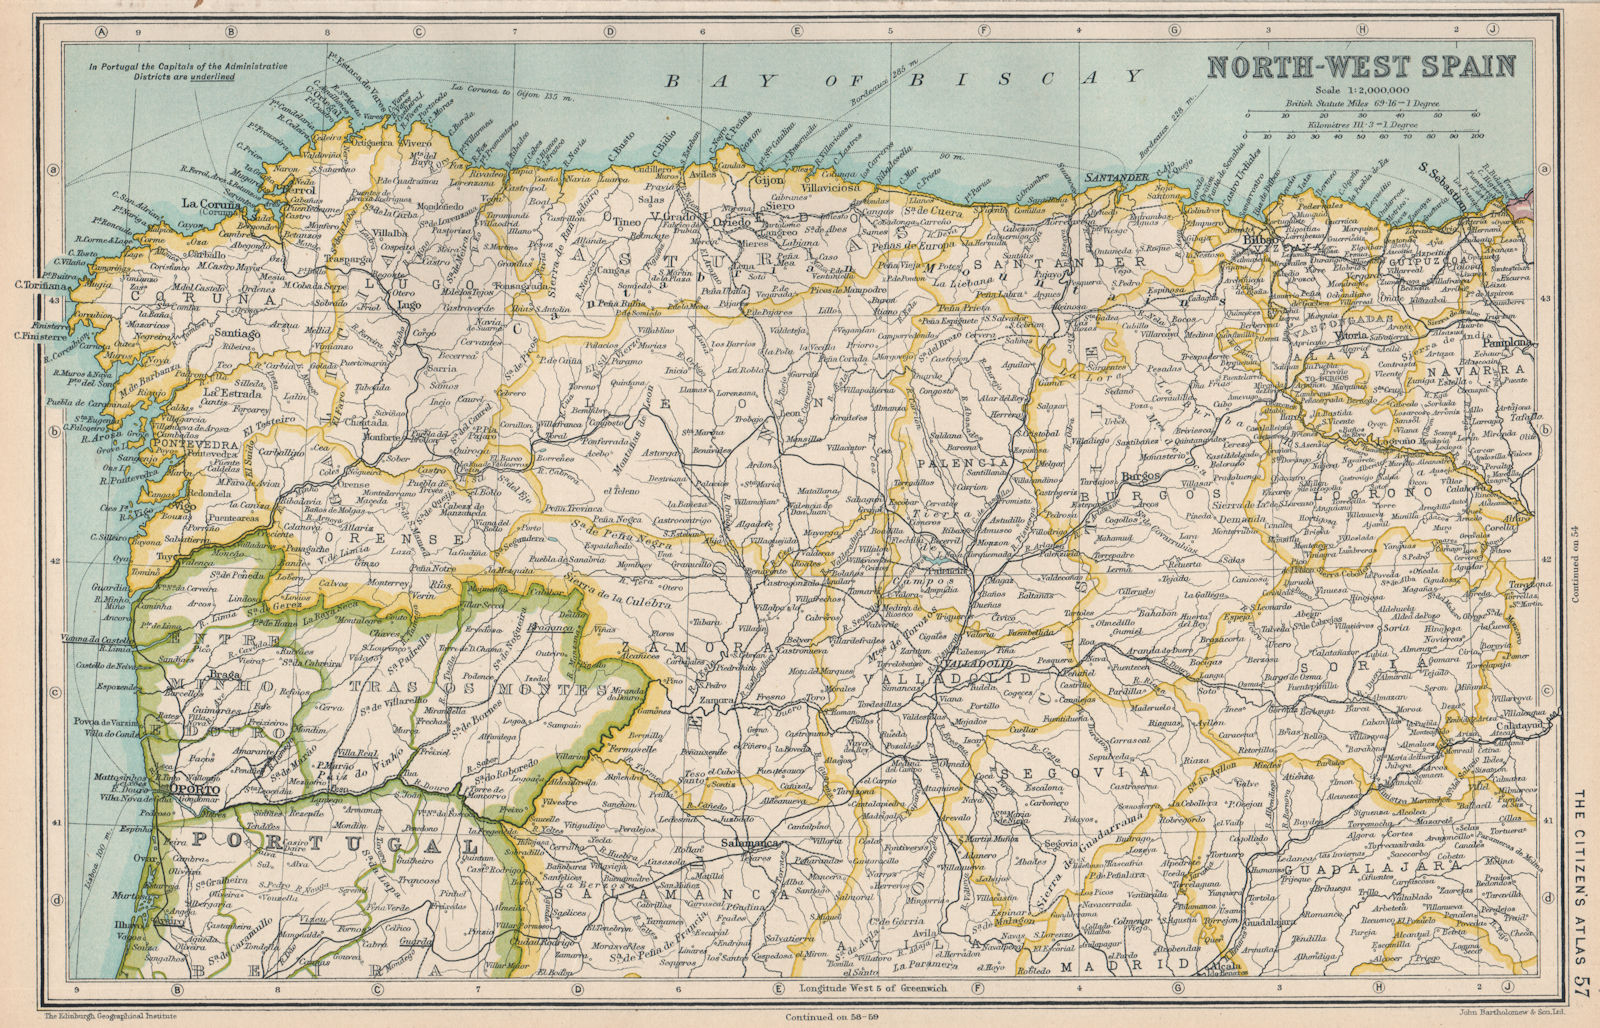 NORTH-WEST SPAIN. Galicia Asturias Leon Old Castille Basque Country 1924 map